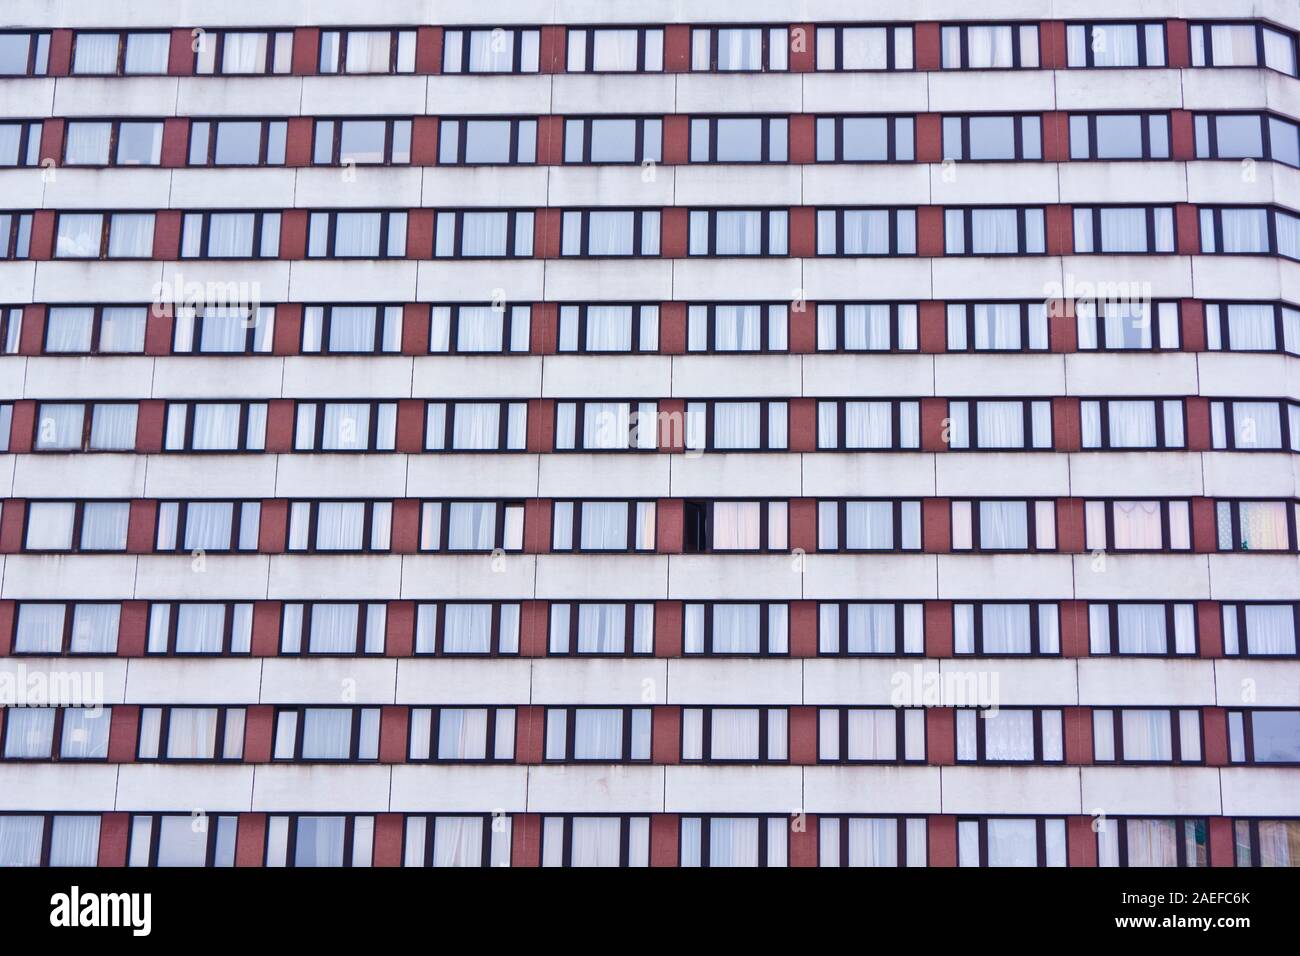 rows of closed windows just one window open Stock Photo